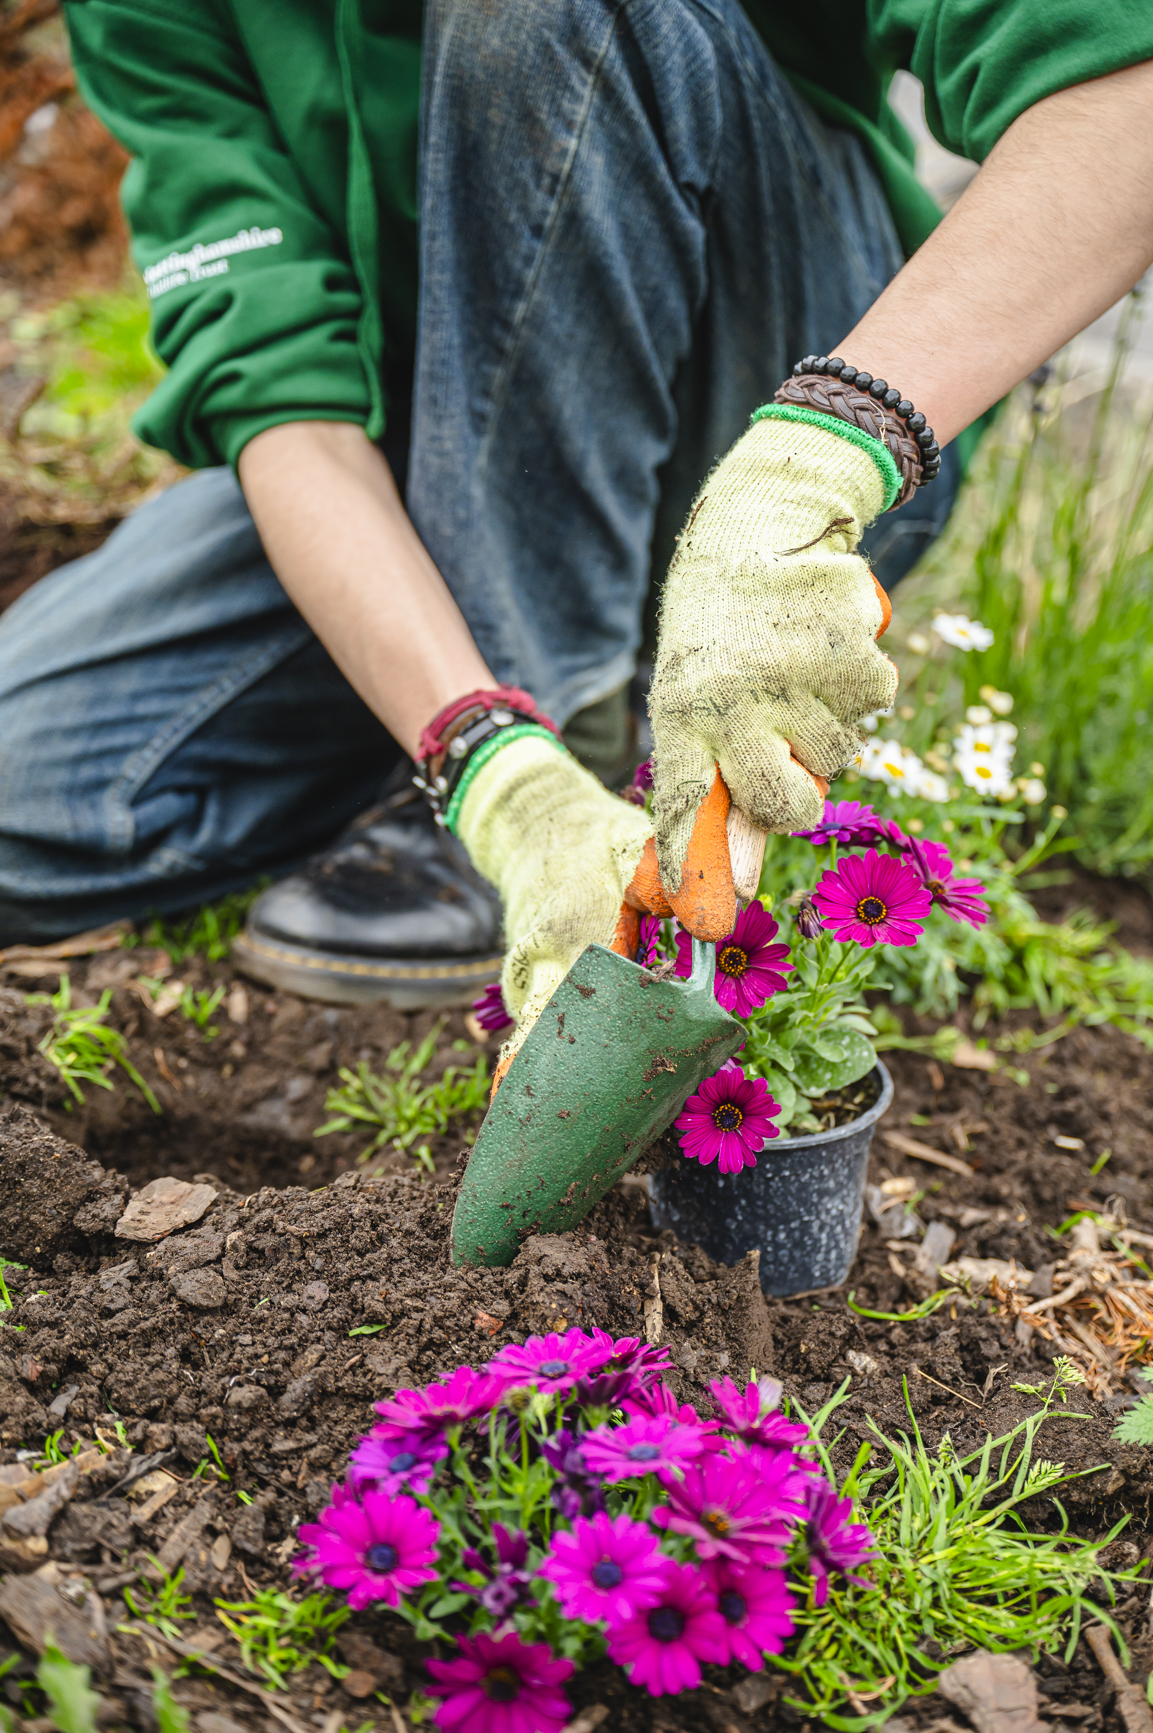 Image of a pair of hands working on a garden